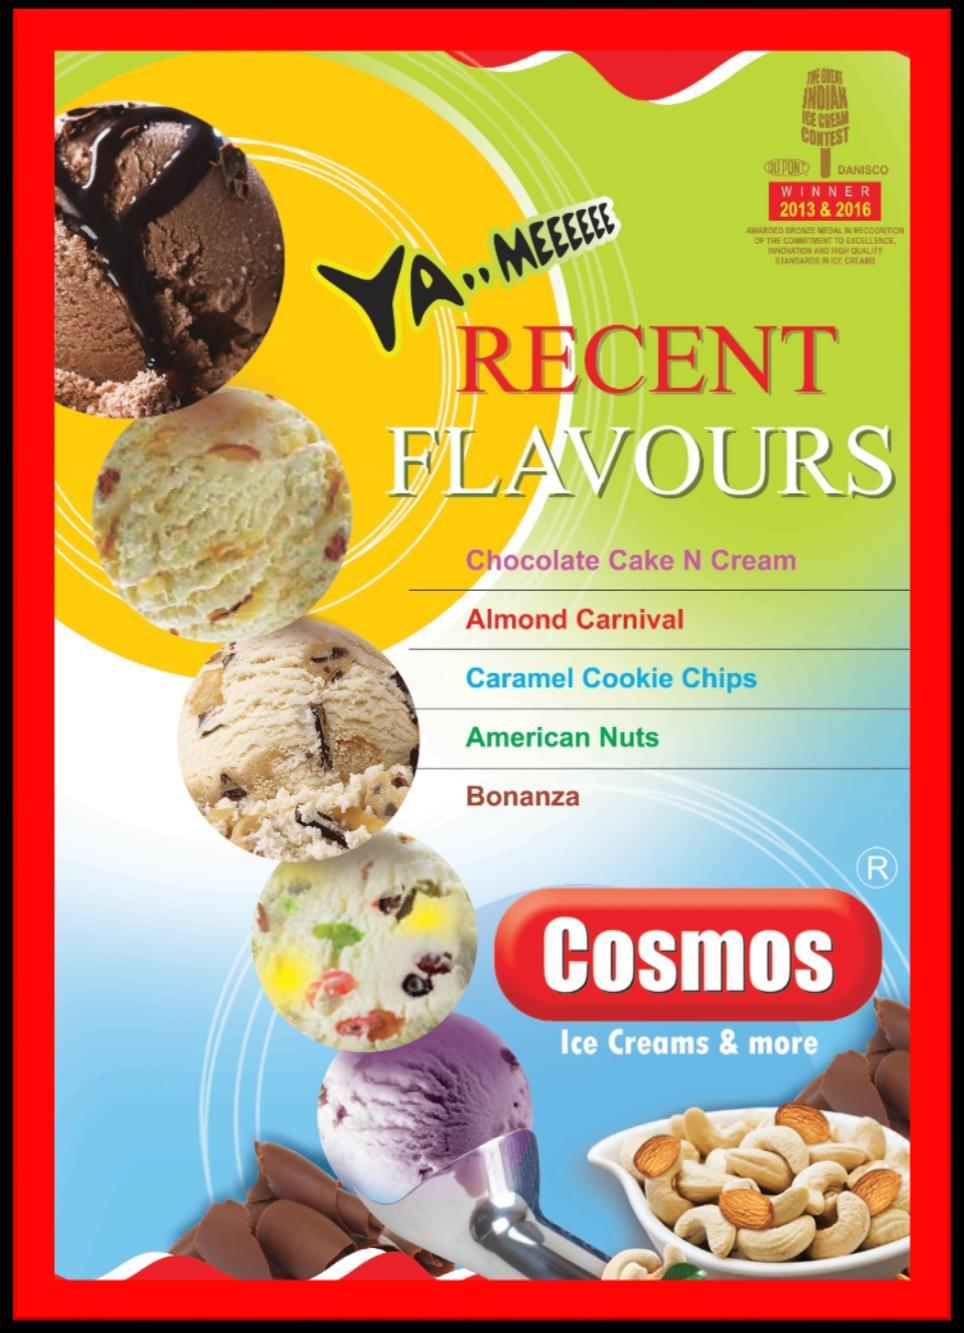 Recent flavours launched for Flavour of the month